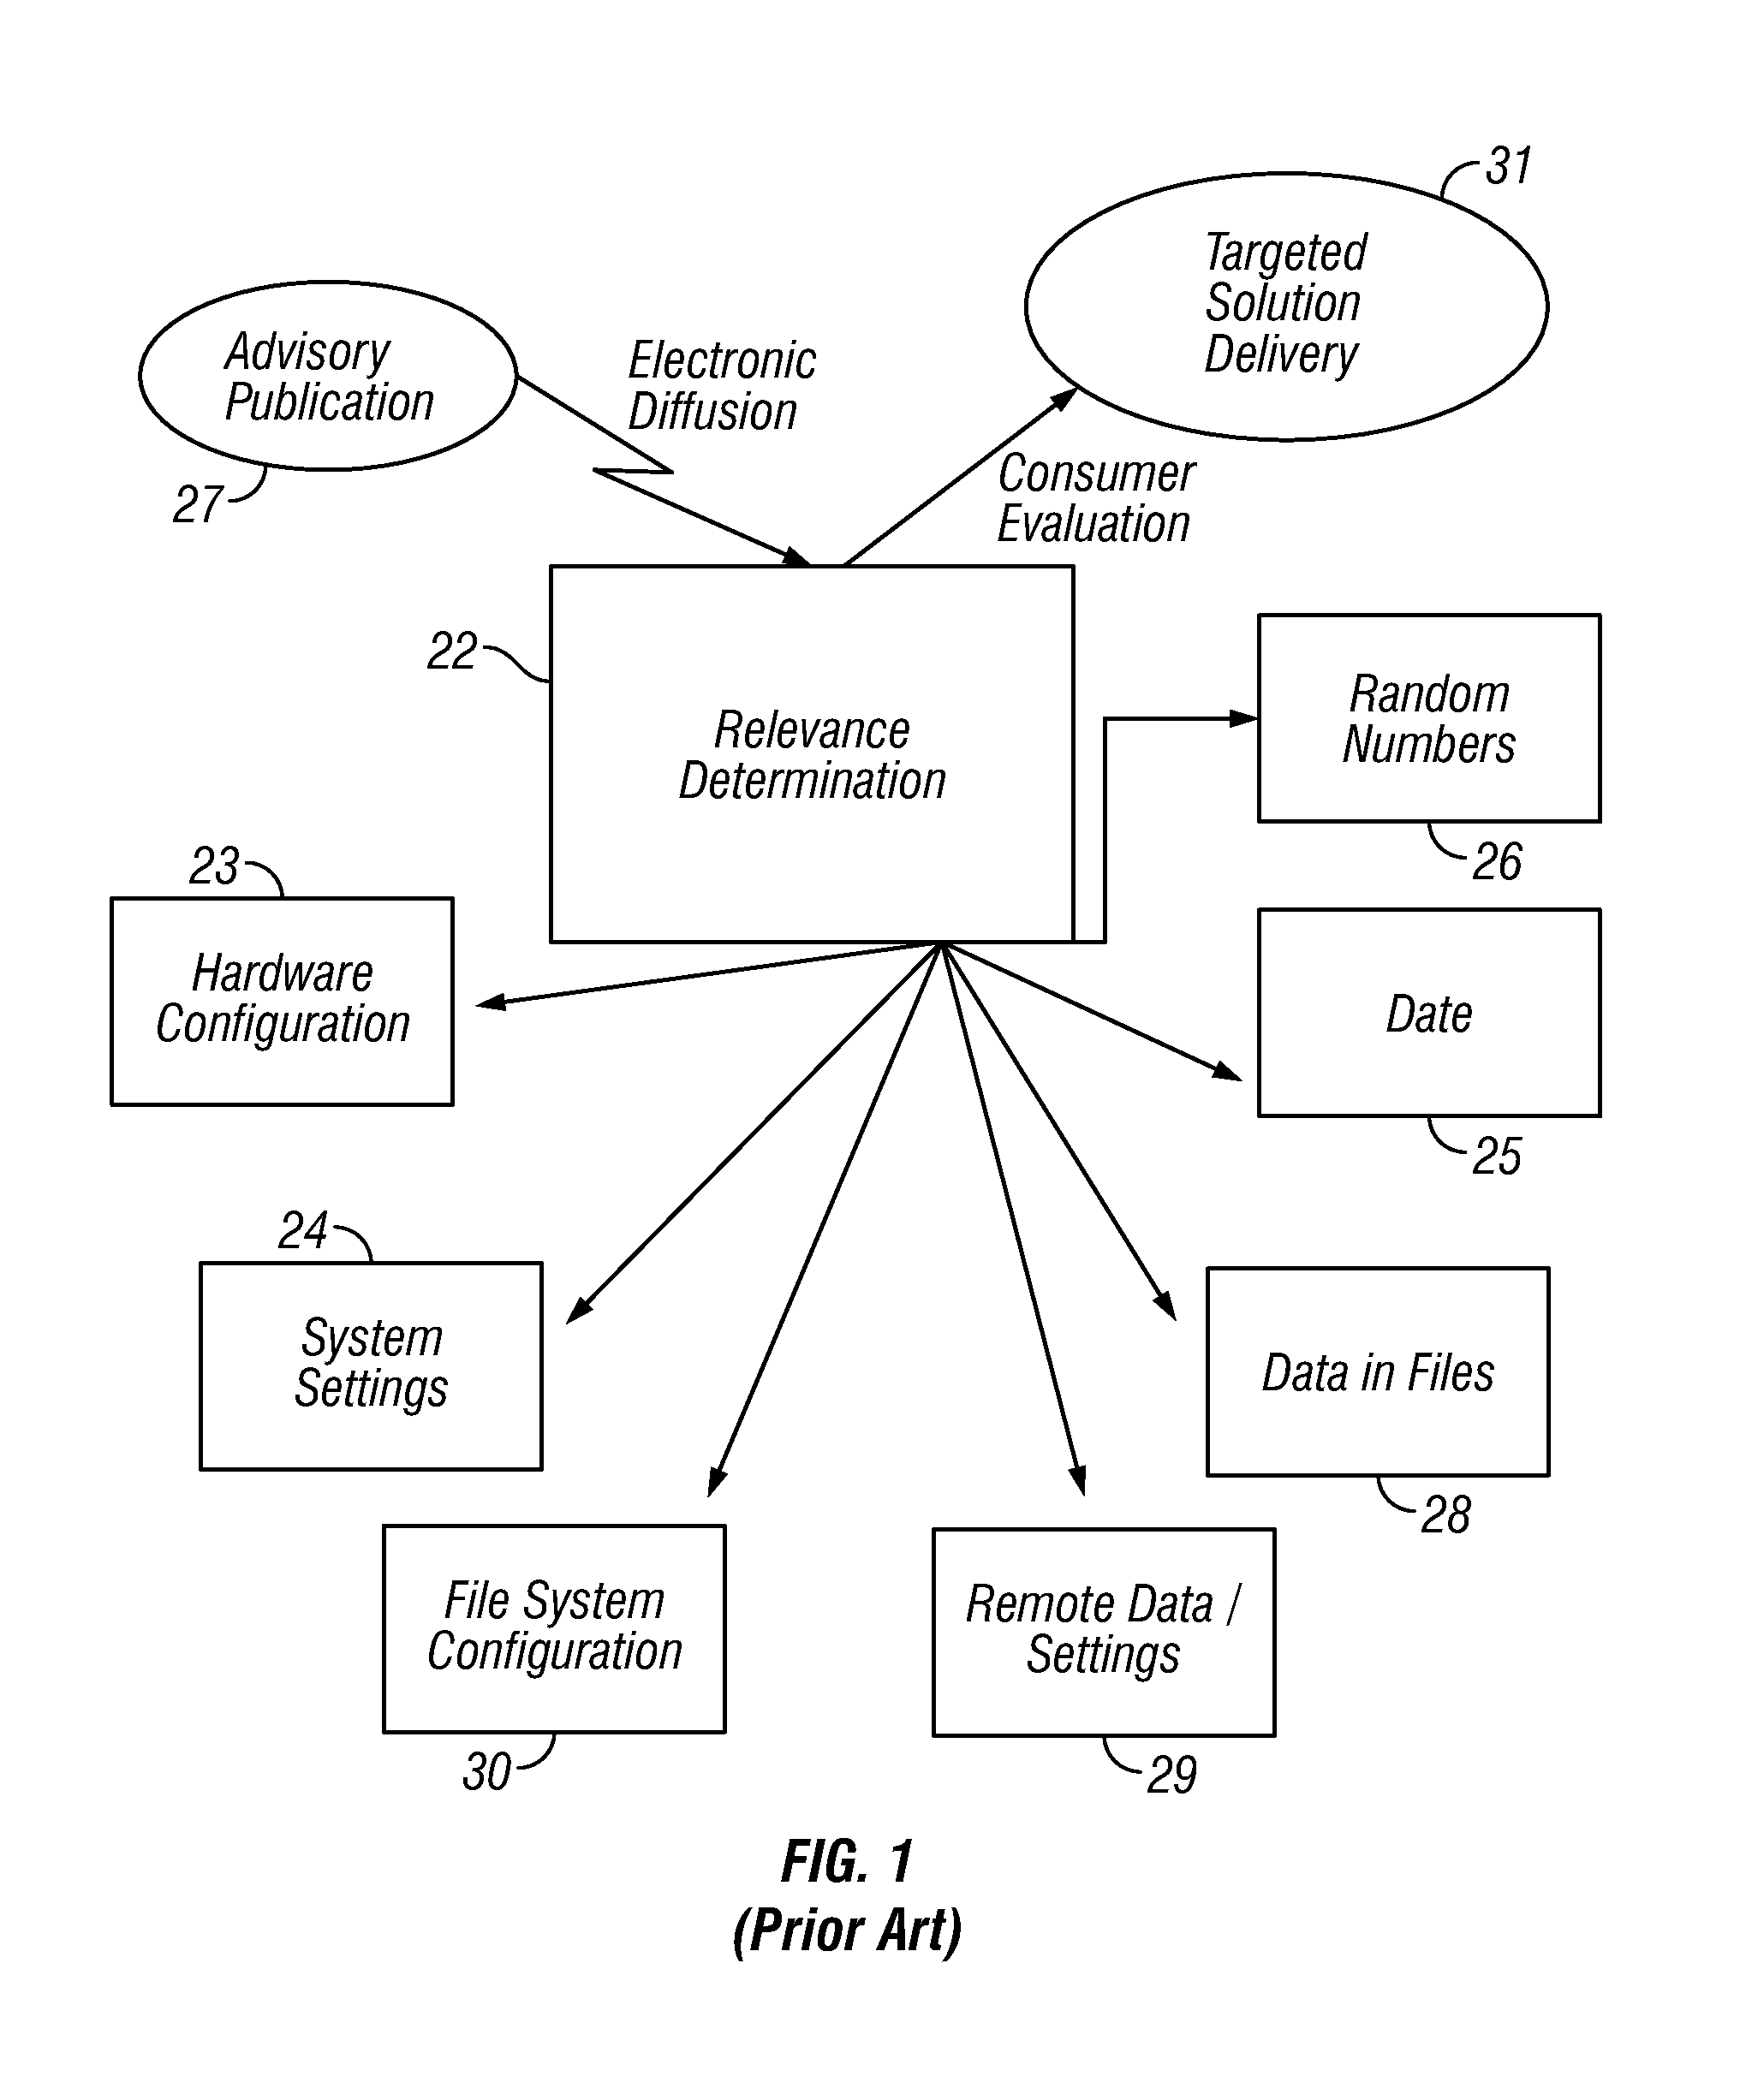 Method And Apparatus For Distributed Policy-Based Management And Computed Relevance Messaging With Remote Attributes